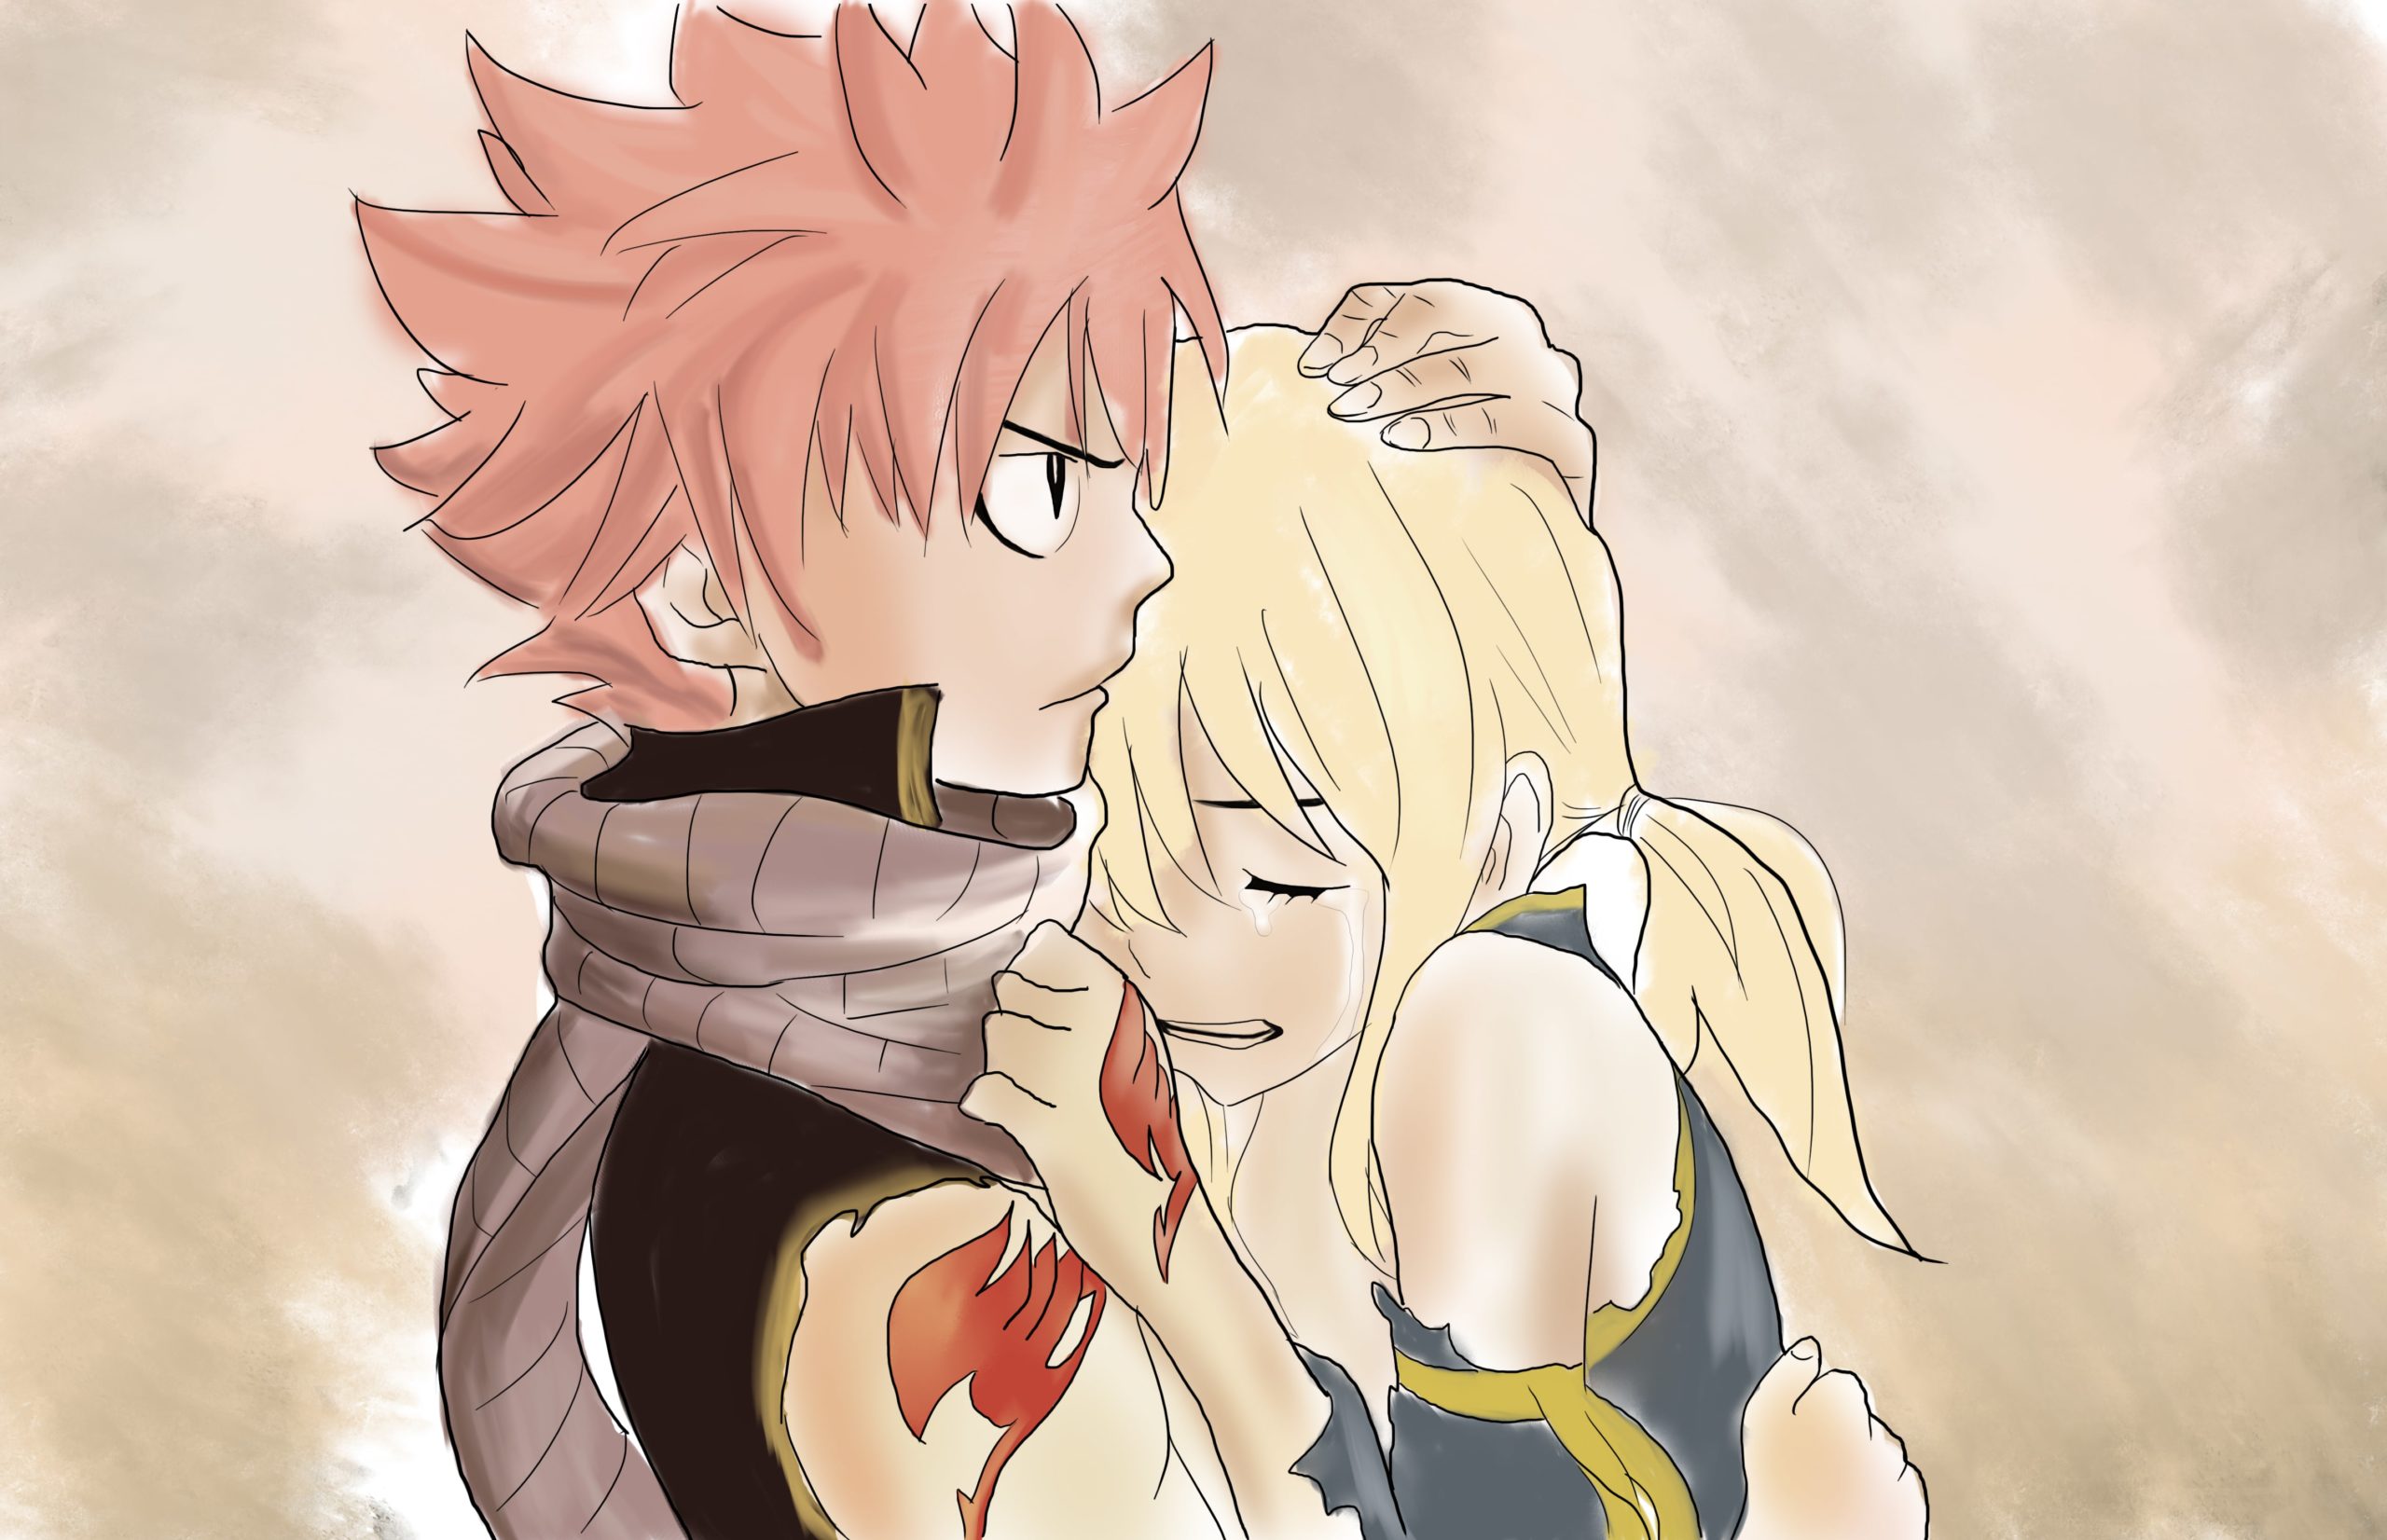 Best of Natsu and lucy fanfiction